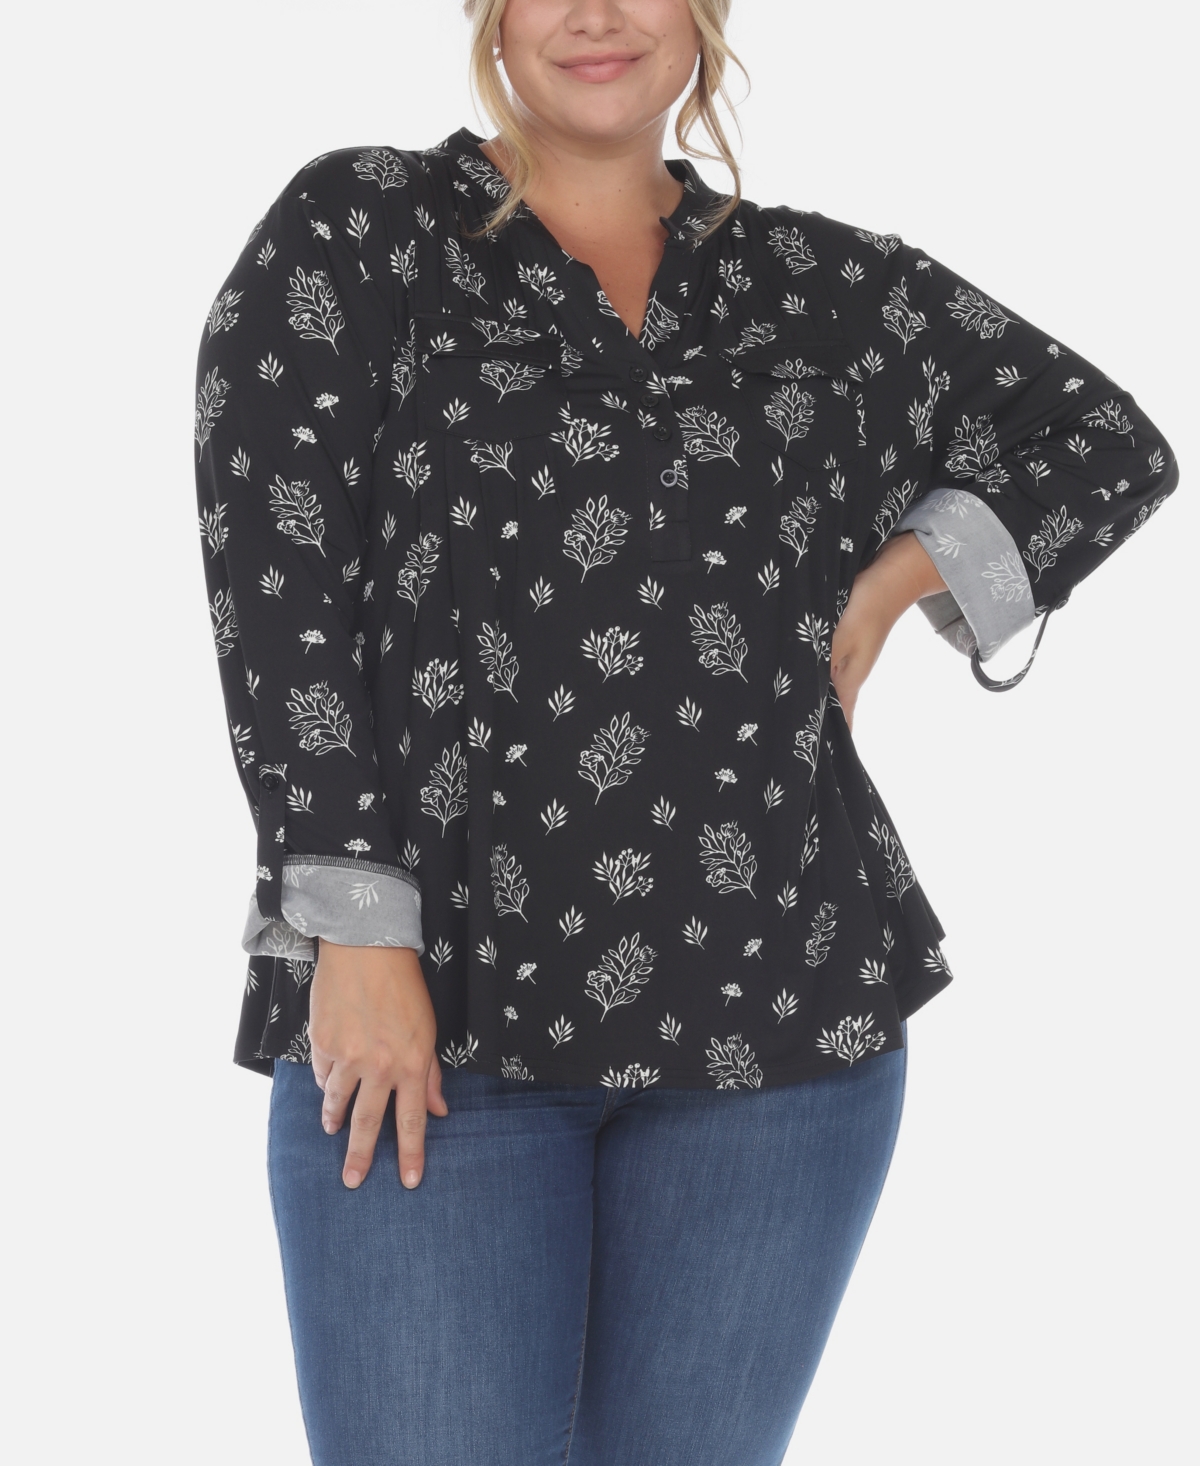 Plus Size Pleated Long Sleeve Top - Black